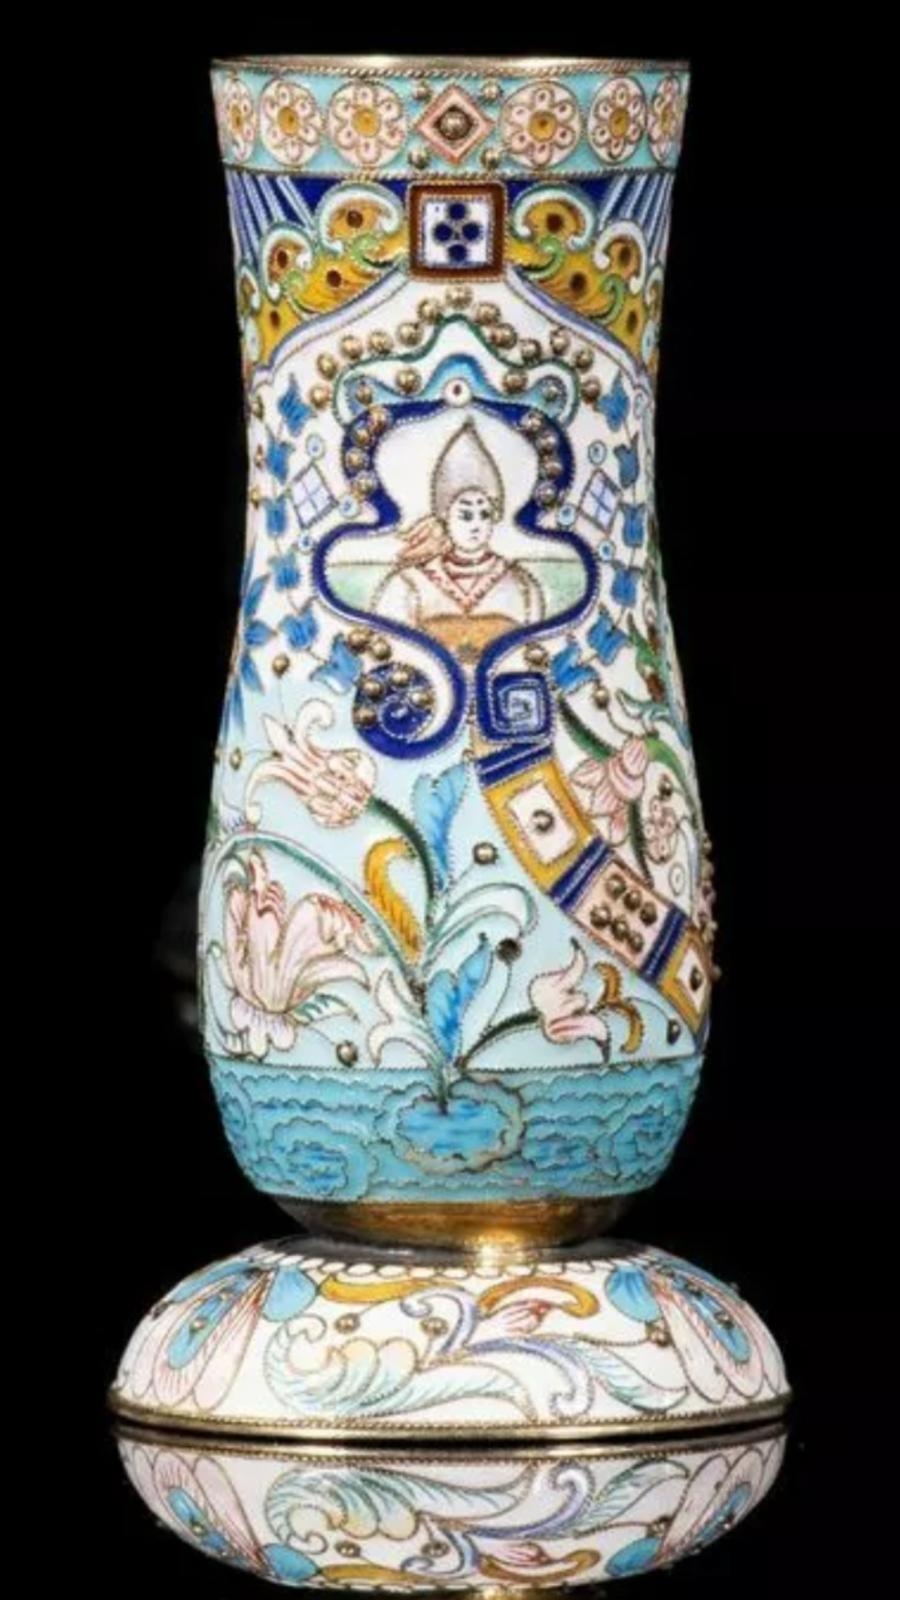 Magnificent Russian silver and enamel large cup vase Total weight: 171.57 grams. Dimensions: 11. - Image 6 of 8